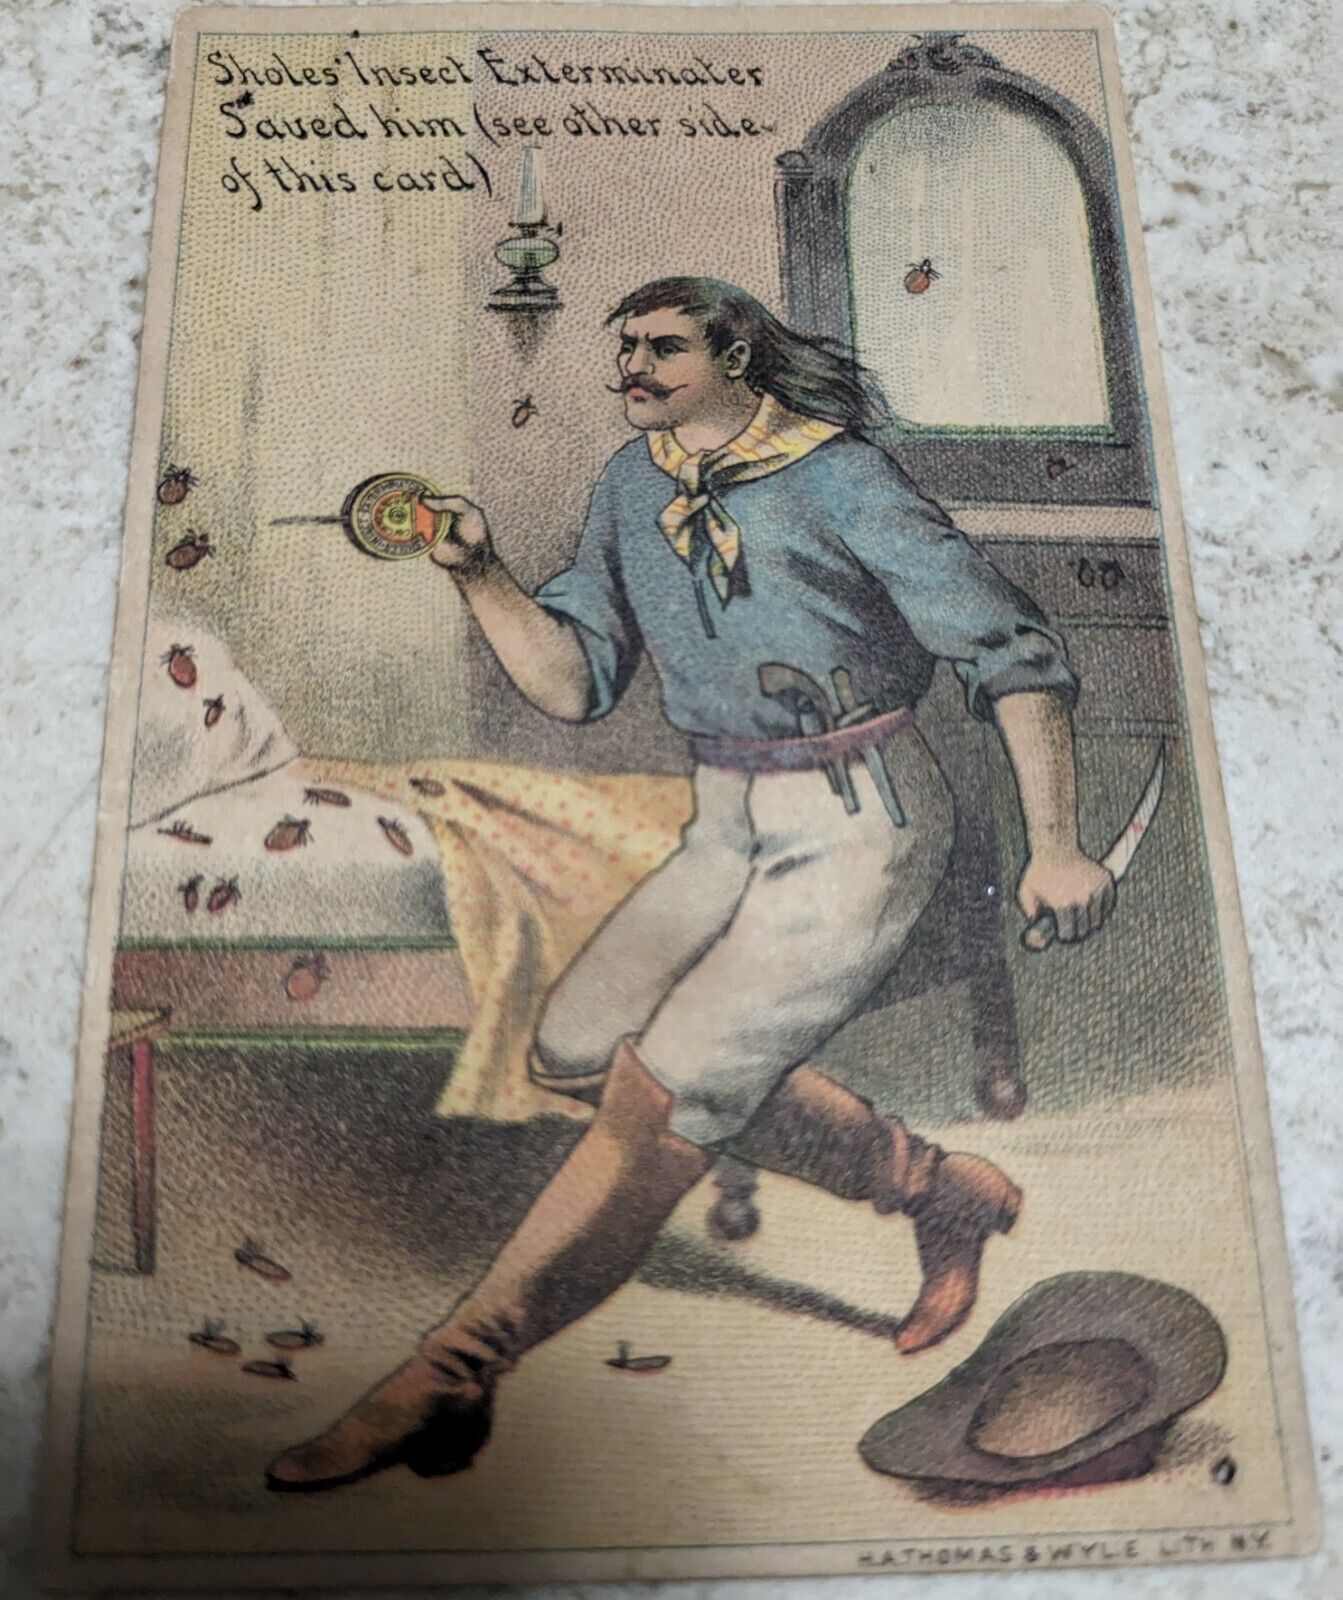 WOW VICT. TRADE CARD EXTERMINATOR AMERICAN CHEMICAL MFG MINING CO ROCHESTER NY